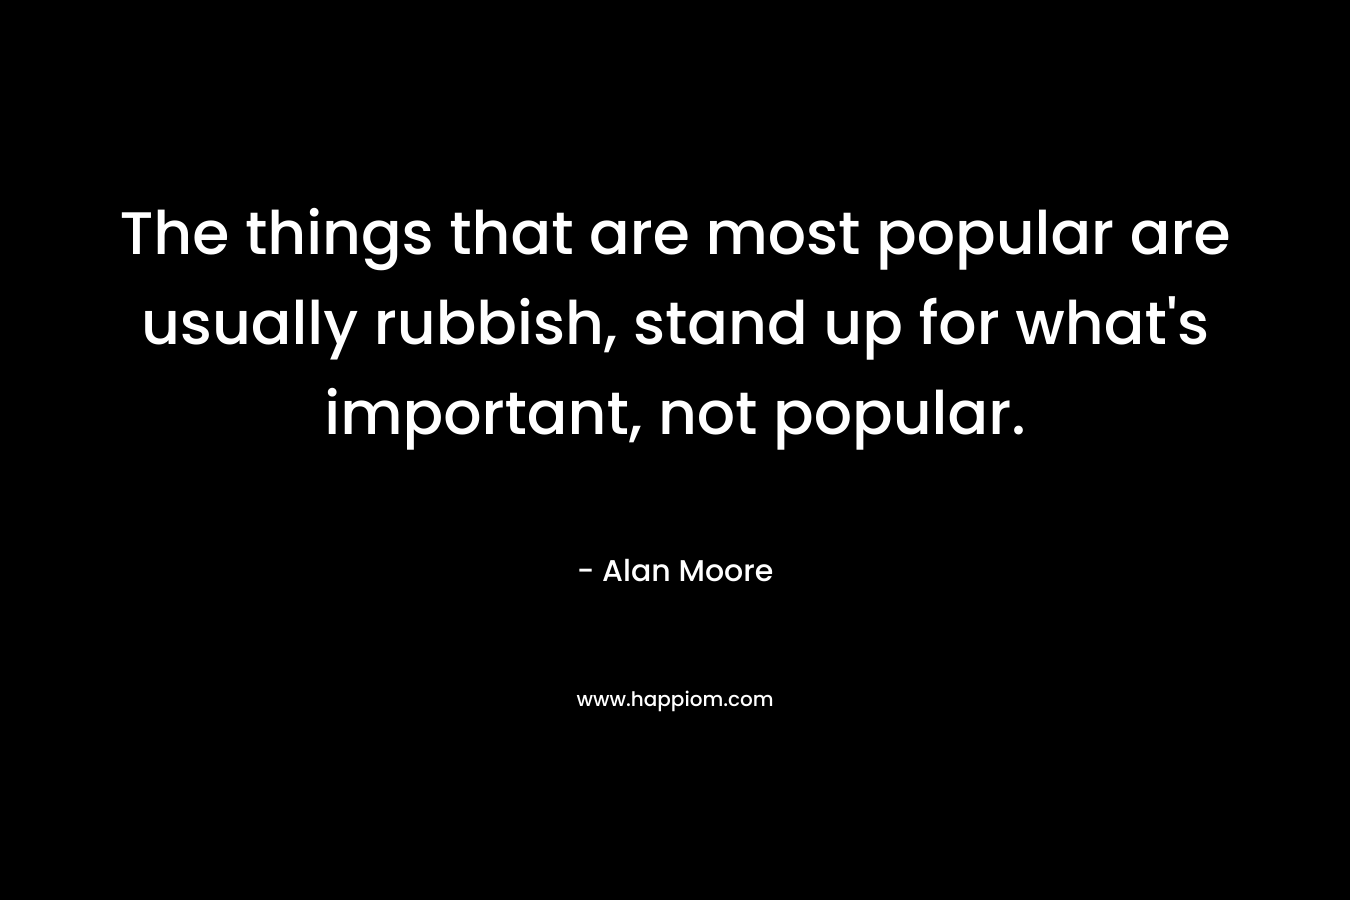 The things that are most popular are usually rubbish, stand up for what’s important, not popular. – Alan Moore